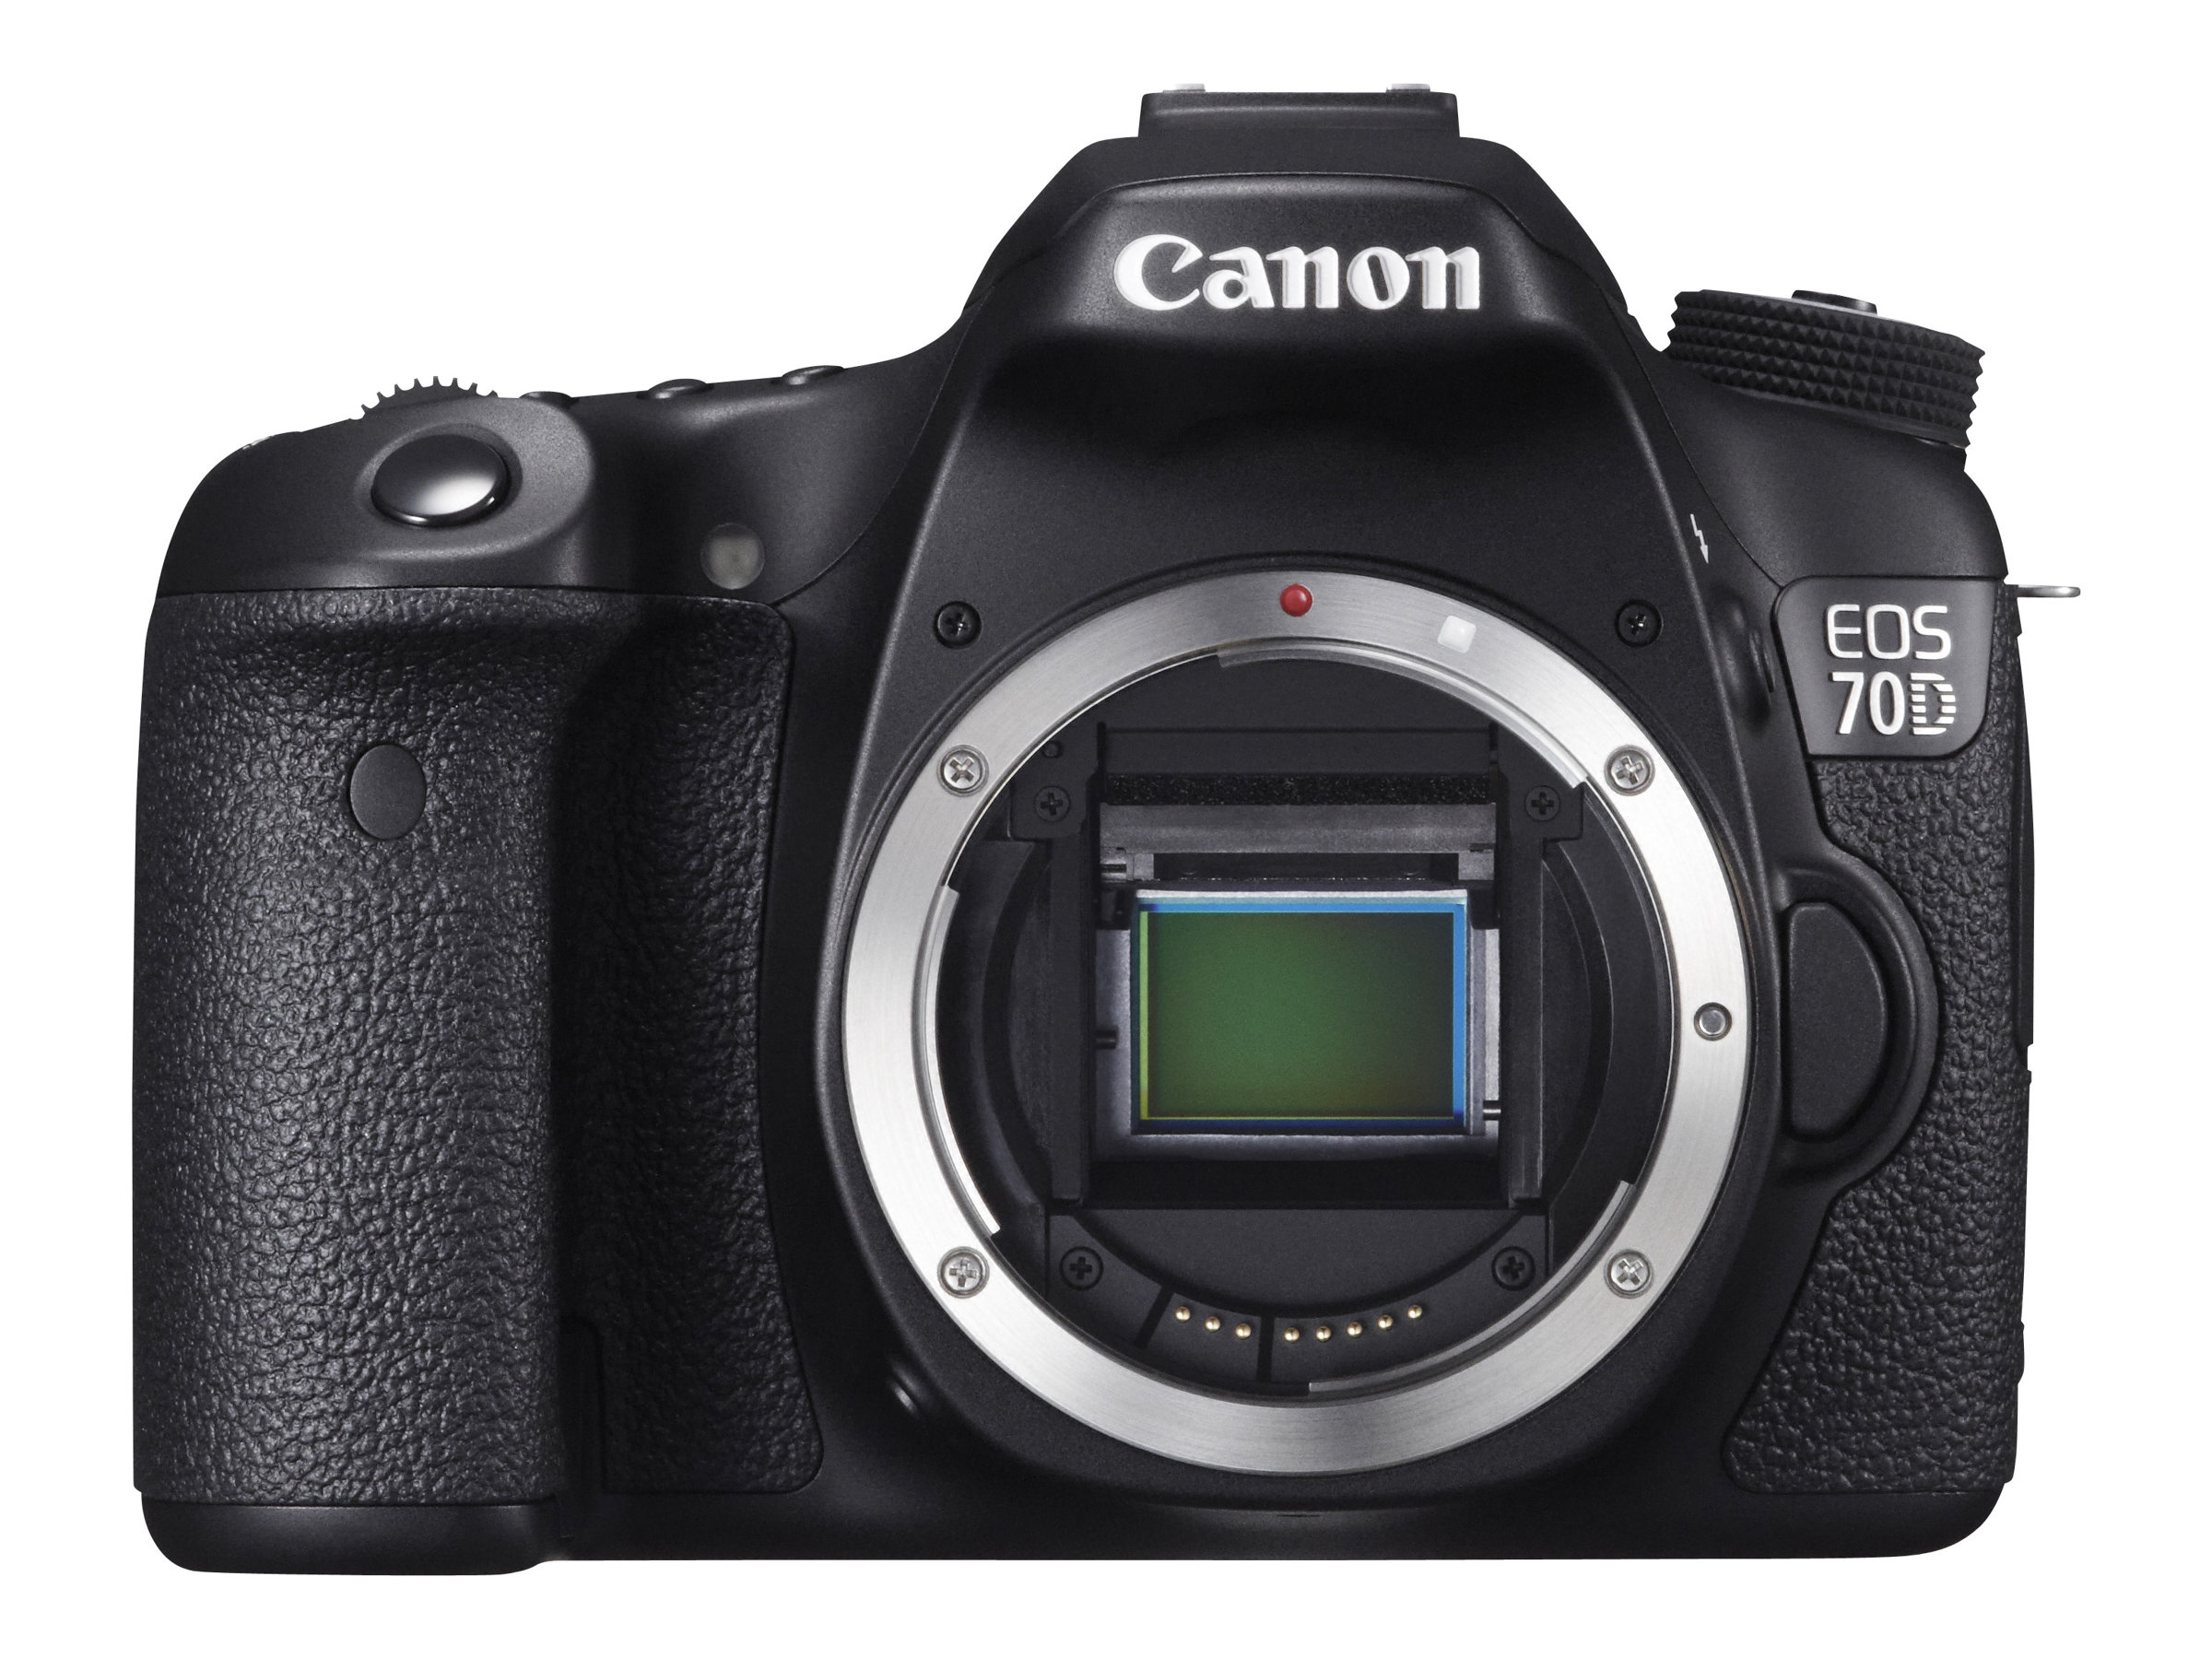 Canon EOS 70D - Digital camera - SLR - 20.2 MP - APS-C - 1080p - 7.5x optical zoom EF-S 18-135mm IS STM lens - Wi-Fi - image 4 of 15